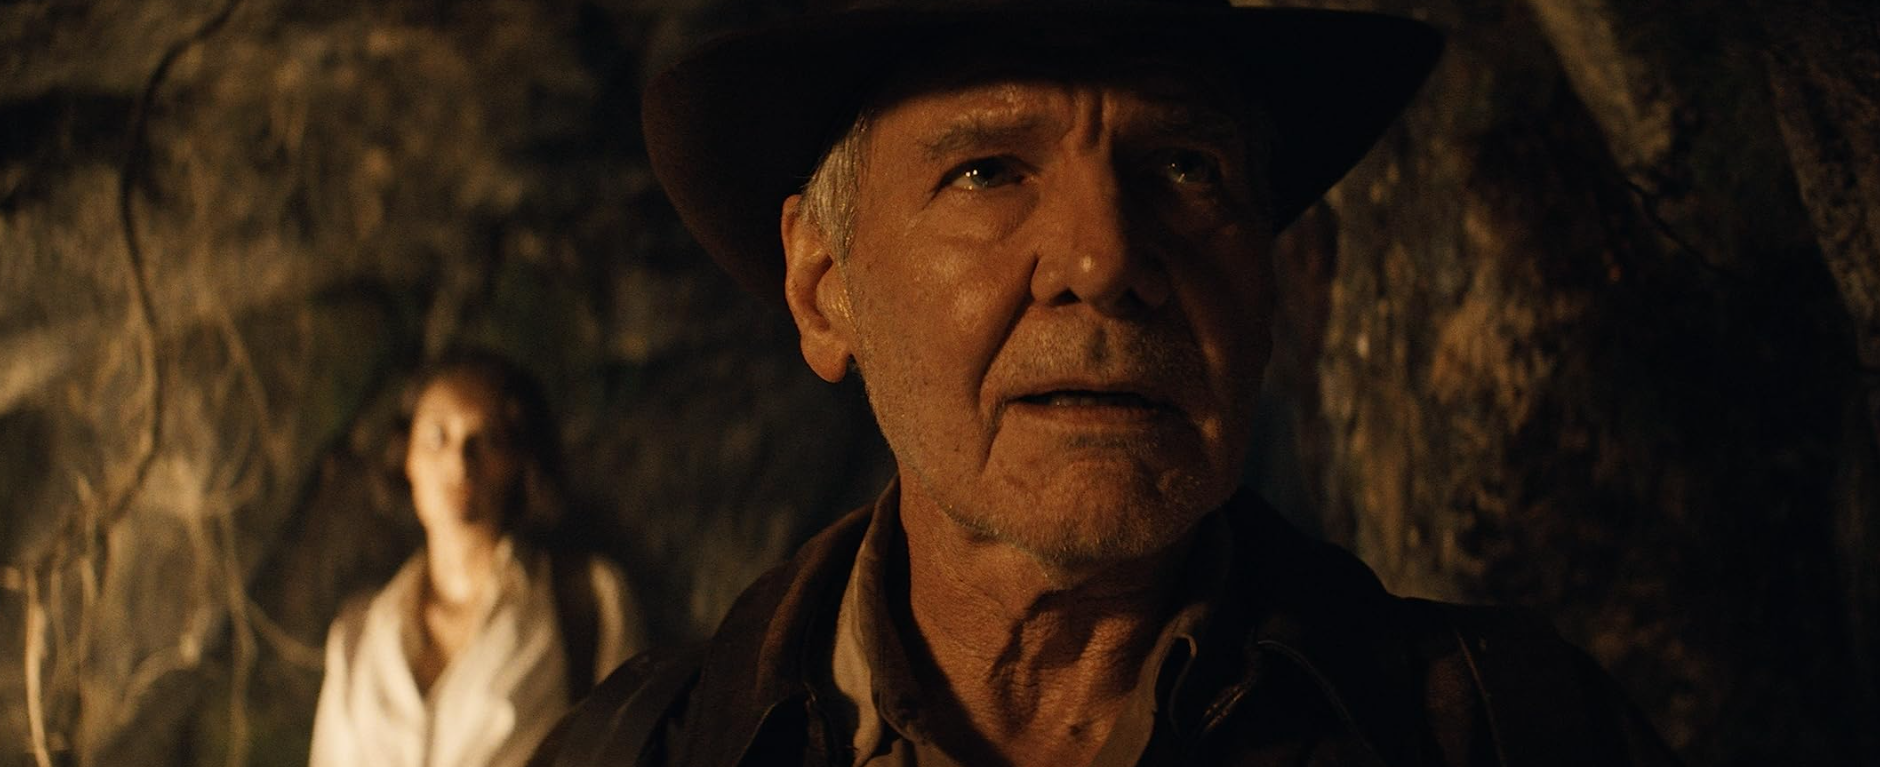 Indiana Jones and the Dial of Destiny is as much a personal marking of time and age as it is for Harrison Ford and Indy himself. 